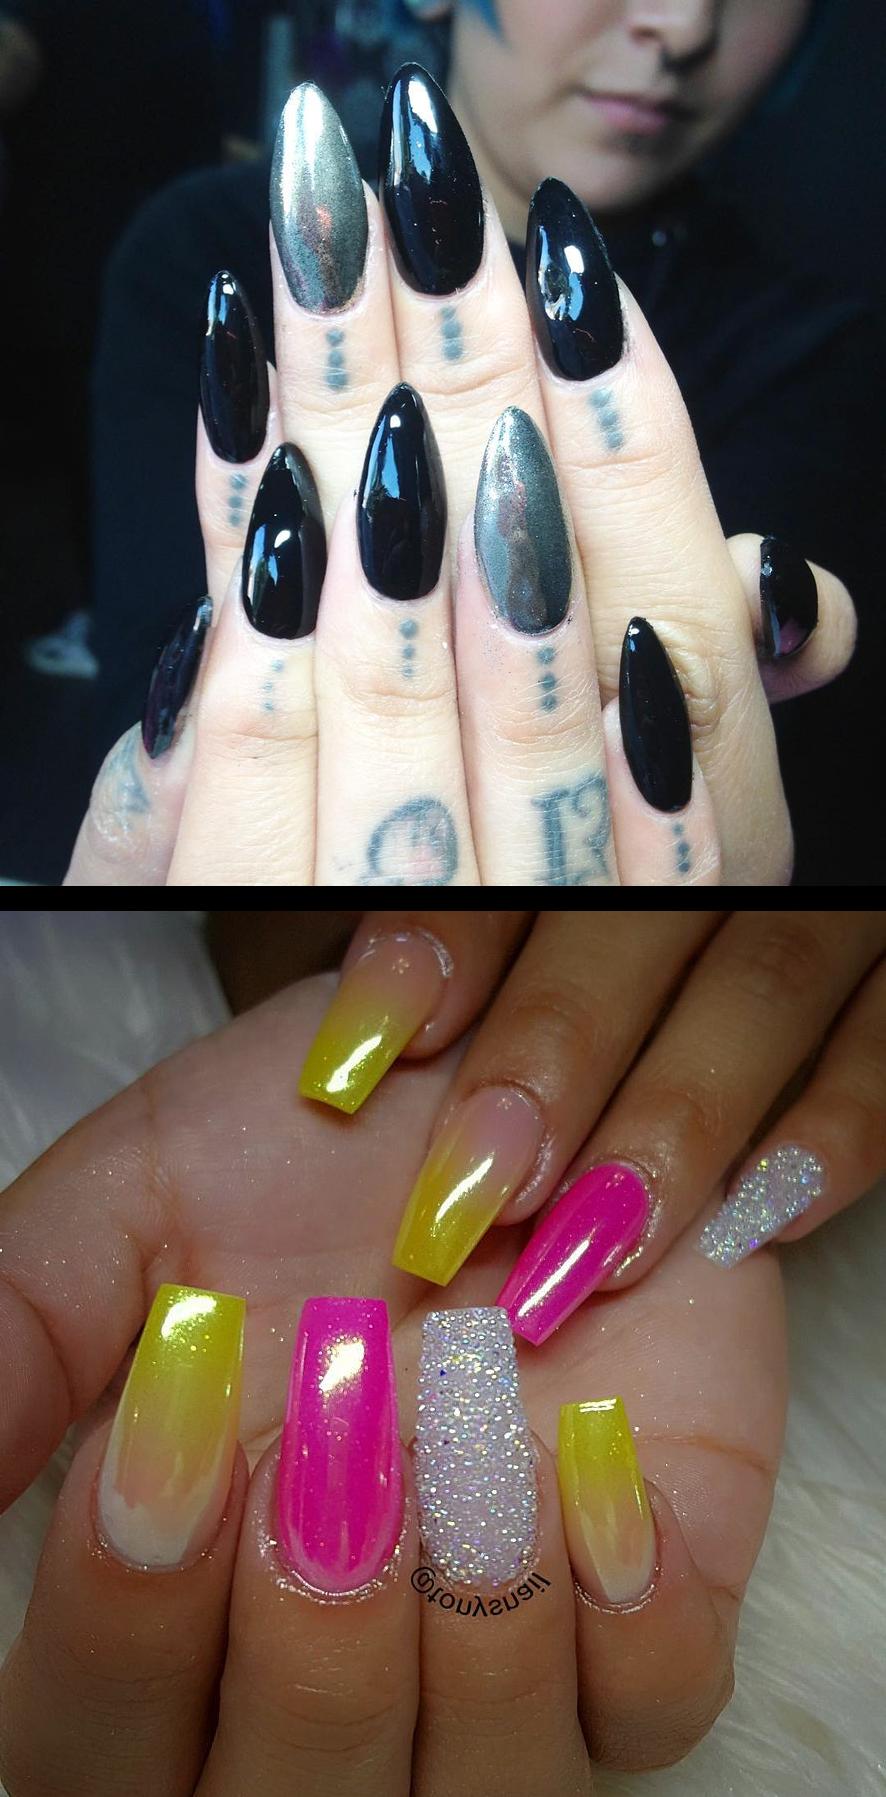 jenny nails,holographic nails,Terminadas citas por FB/latin witch Chrome nails  products  missuamerica.com for new website now 5 business  days free shipping ( this promotion only order on website )  